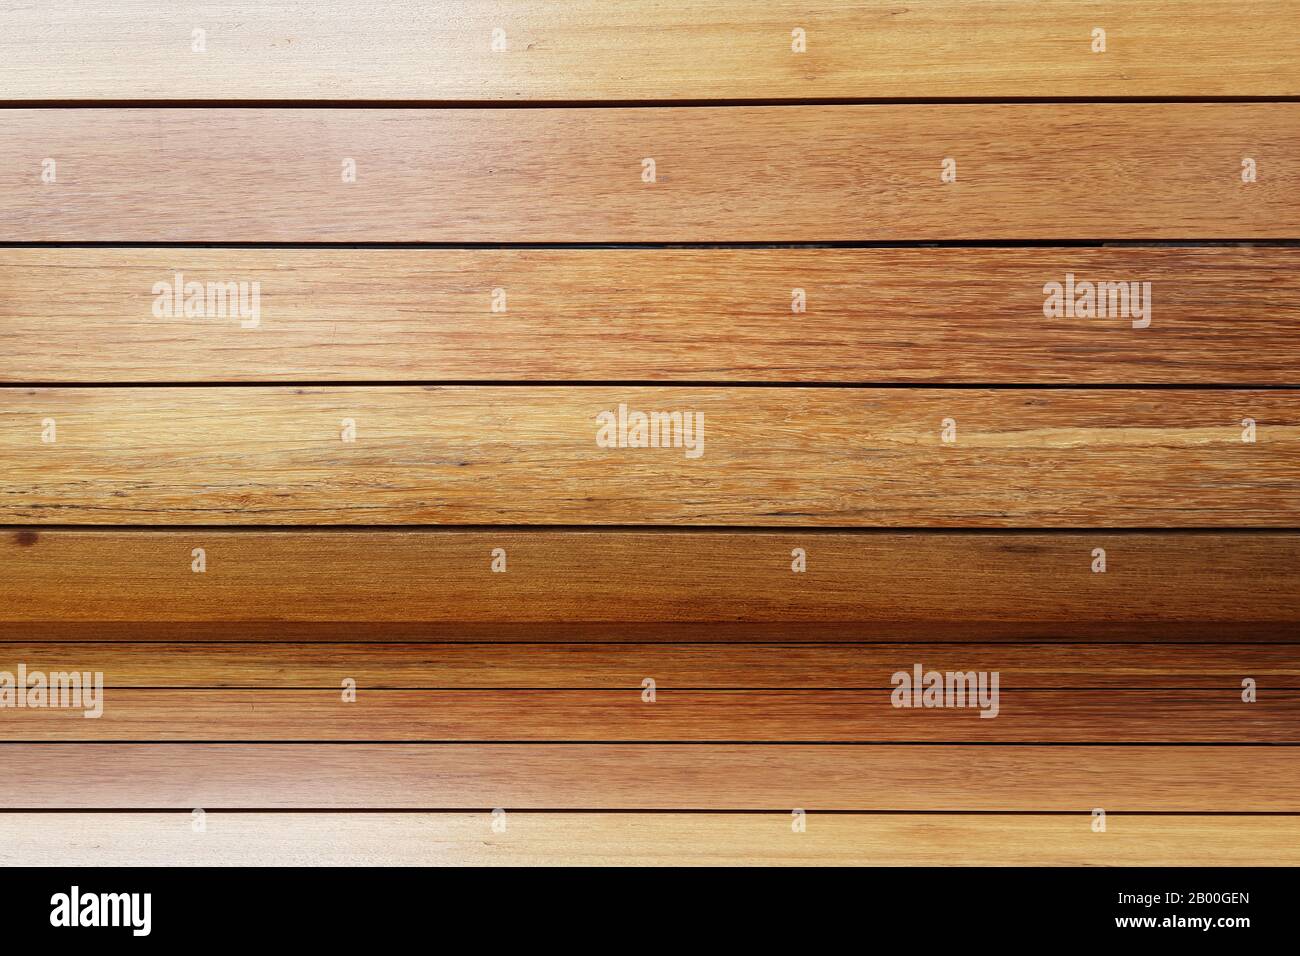 wood plank texture wall and floor background Stock Photo